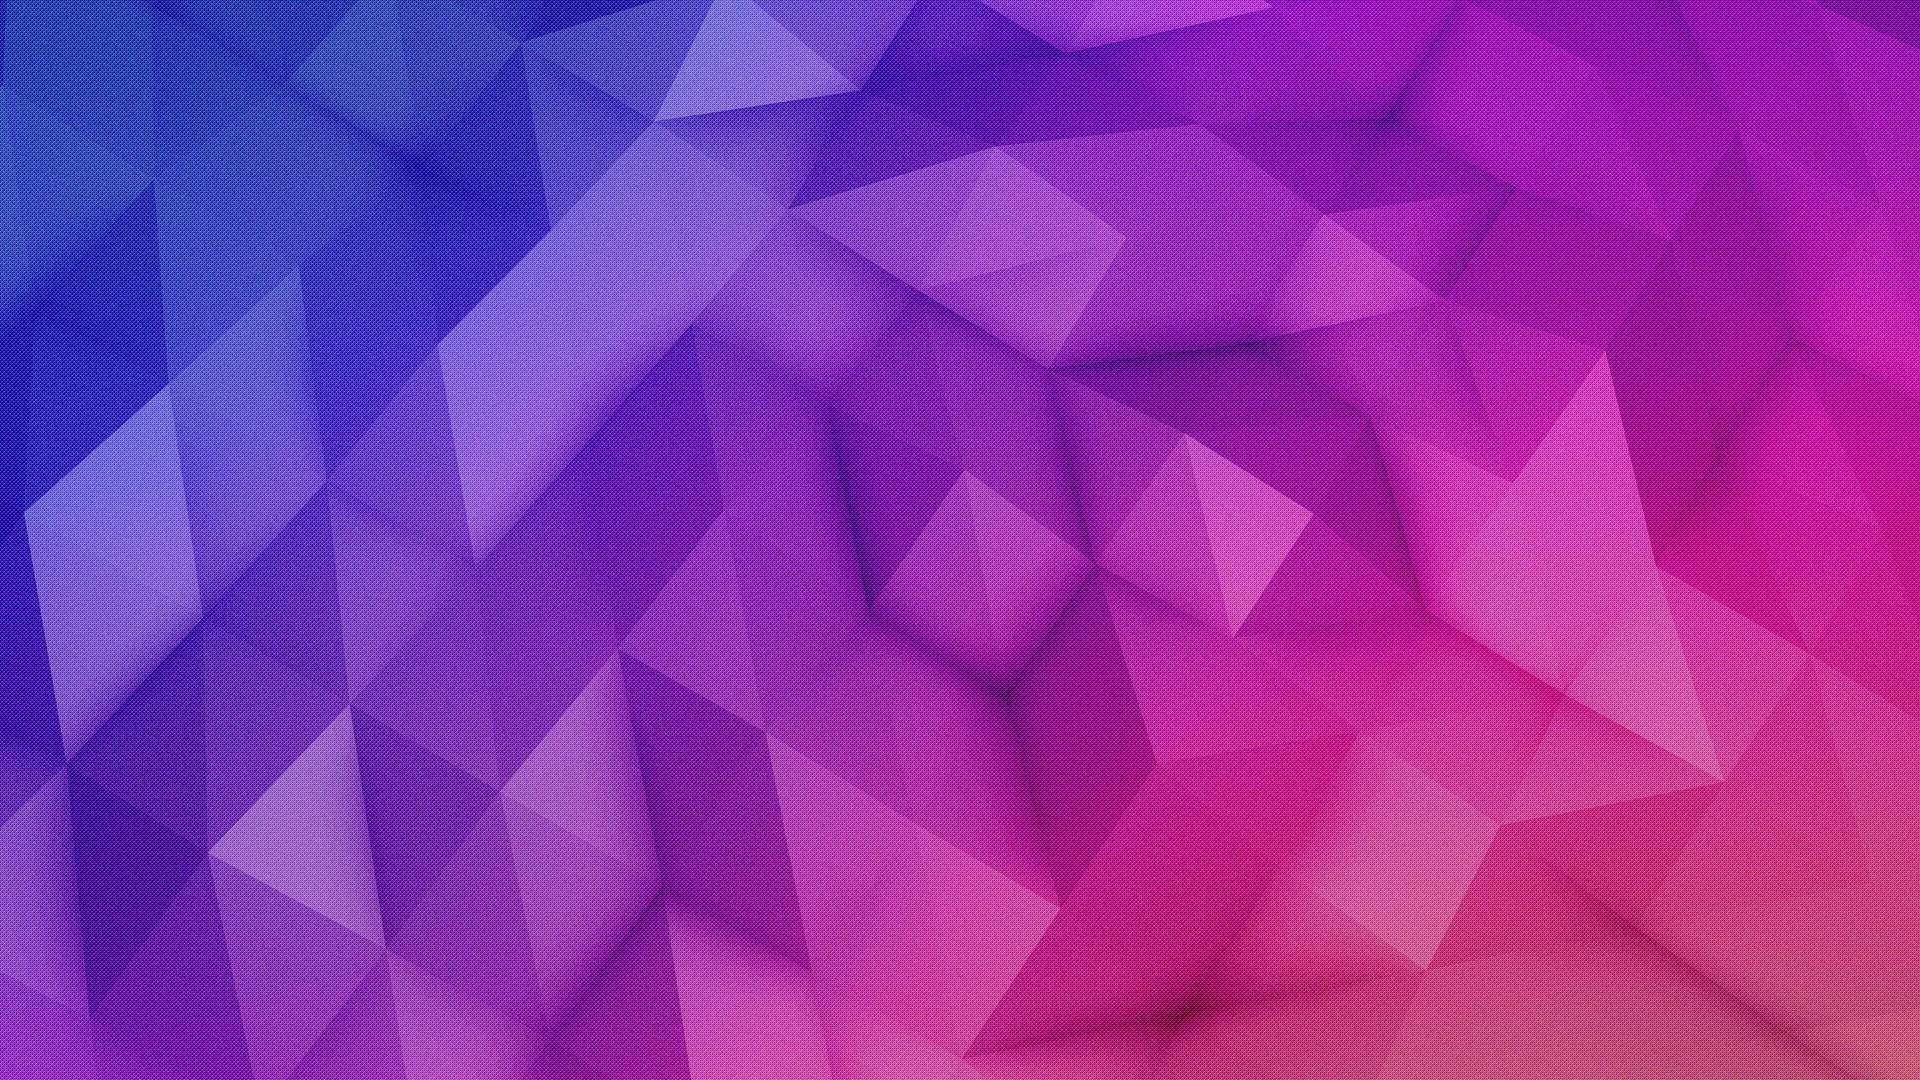 Purple Triangle Wallpapers Top Free Purple Triangle Backgrounds